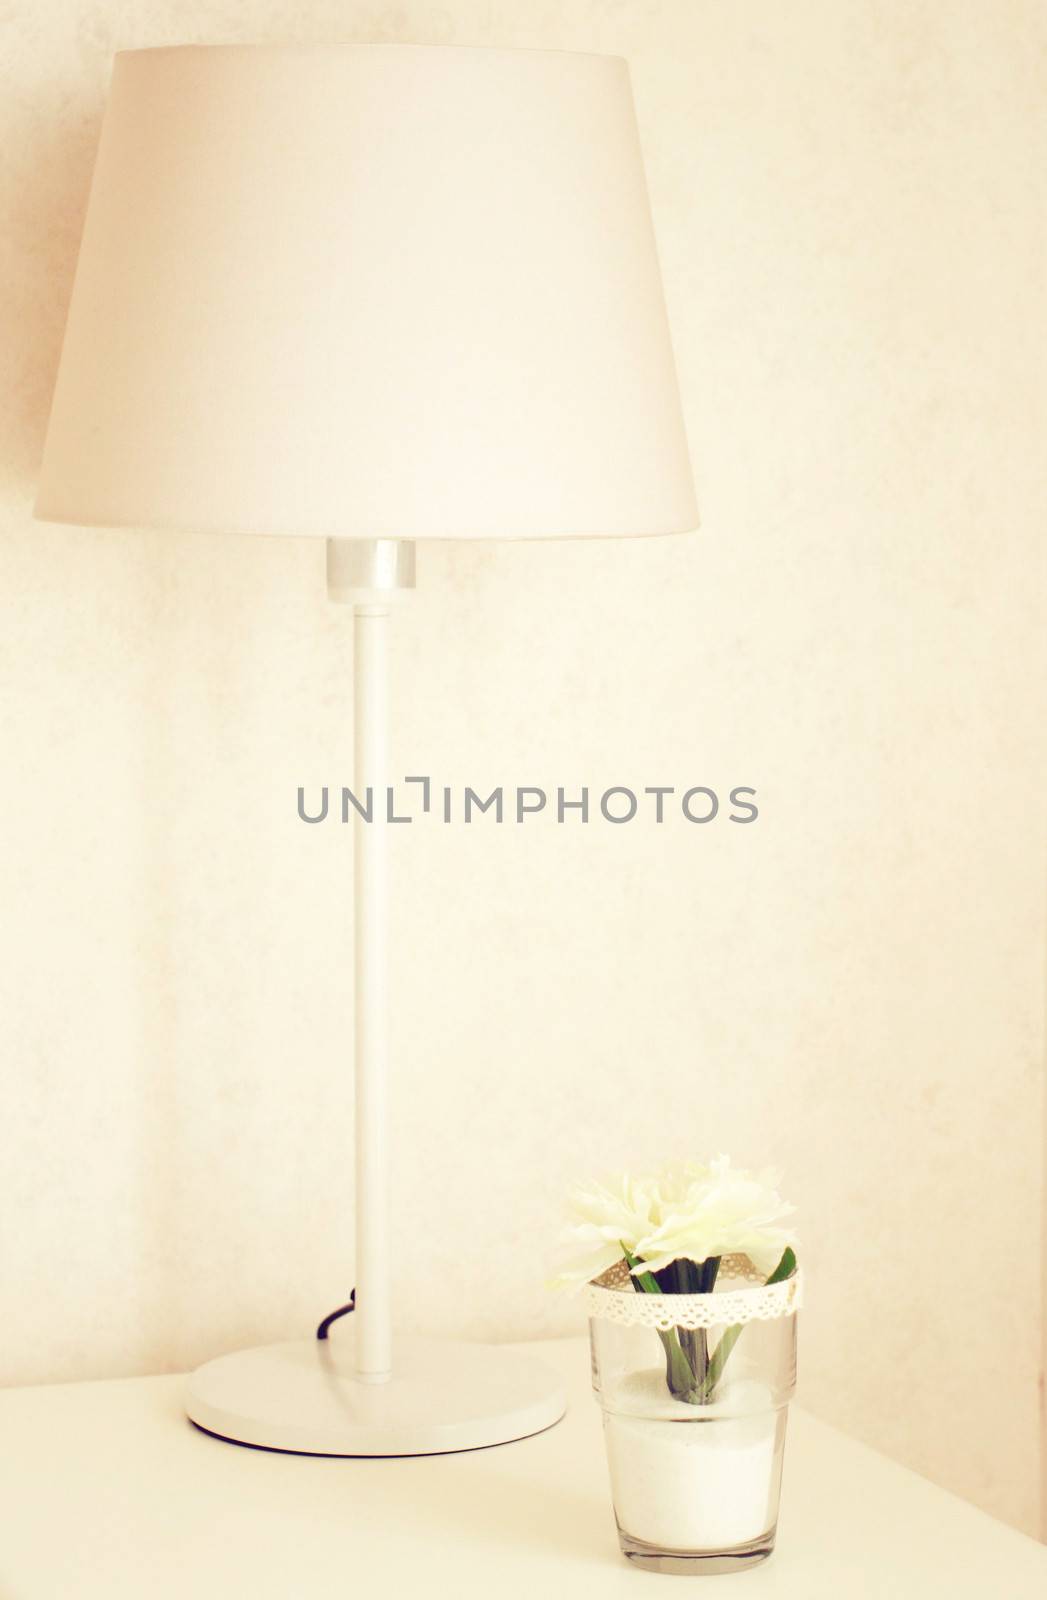 Lamp and flower on the table near bed with retro filter effect  by nuchylee